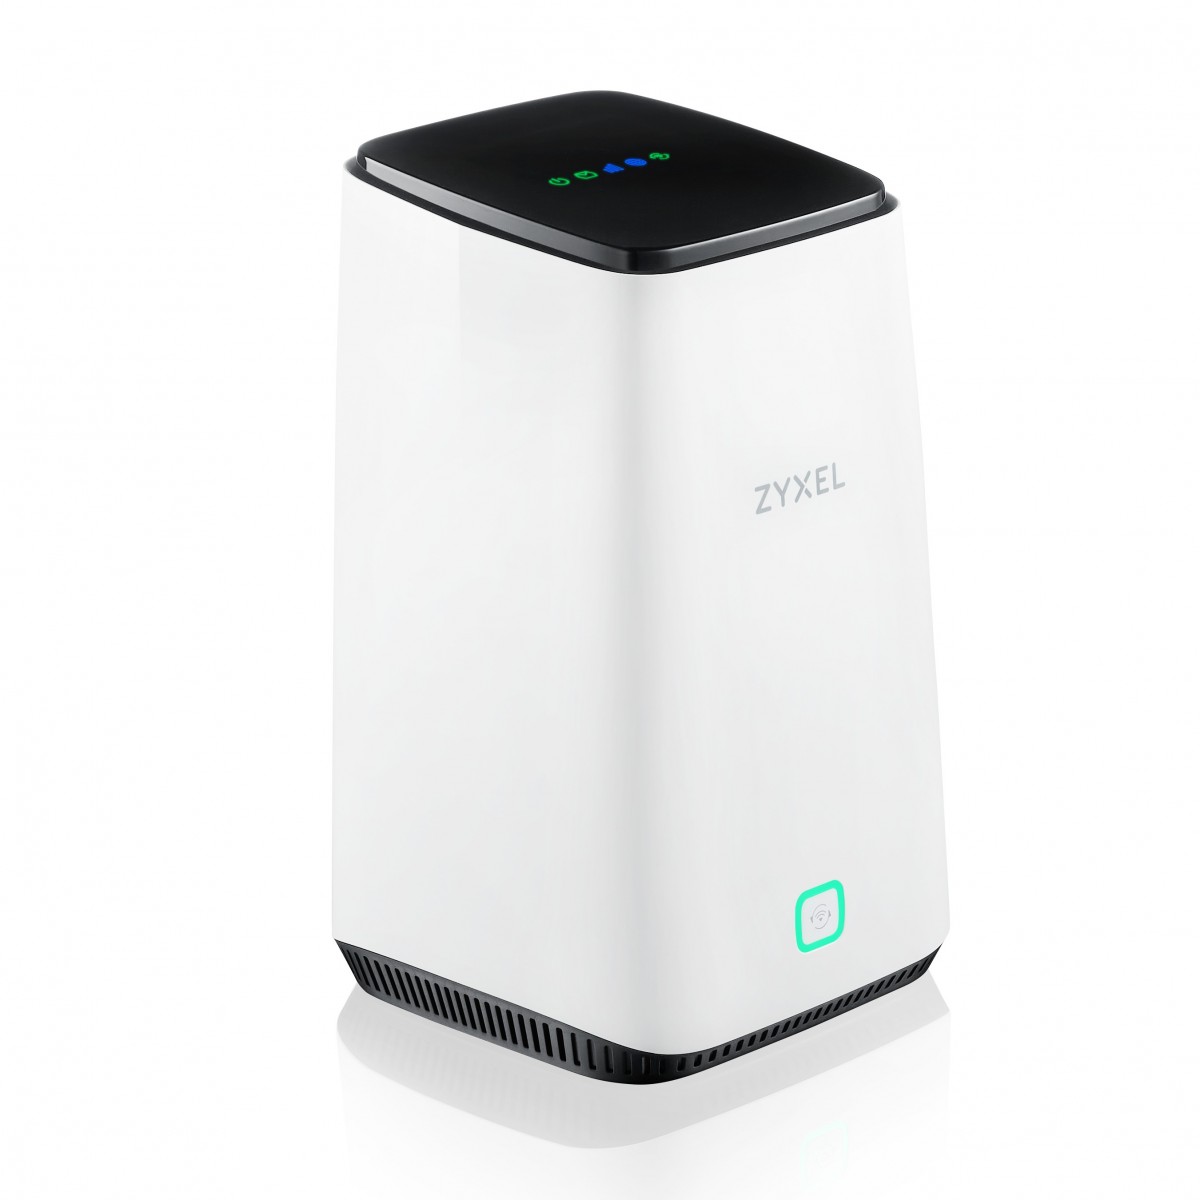 ZyXEL FWA510 5G NR Indoor Router Standalone-Nebula with 1 year Nebula Pro LicenseAX3600 - Router - Indoor use